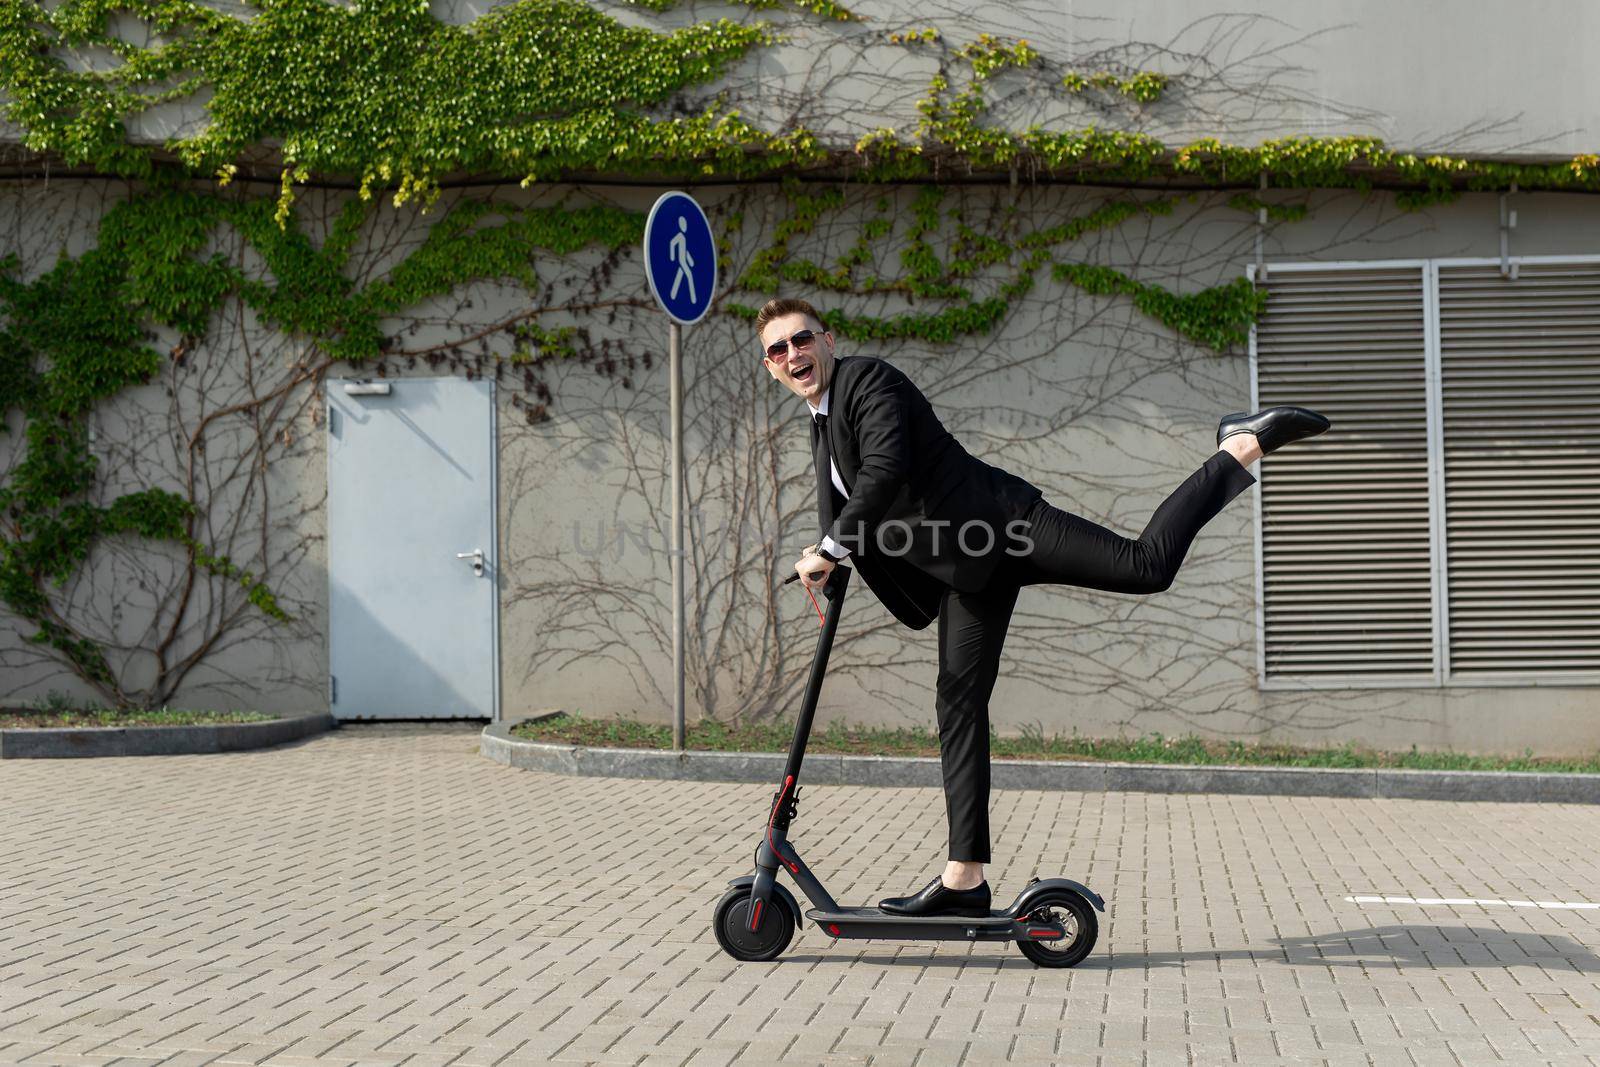 Man in a business suit and sunglasses rides an electric scooter on one and laughs.